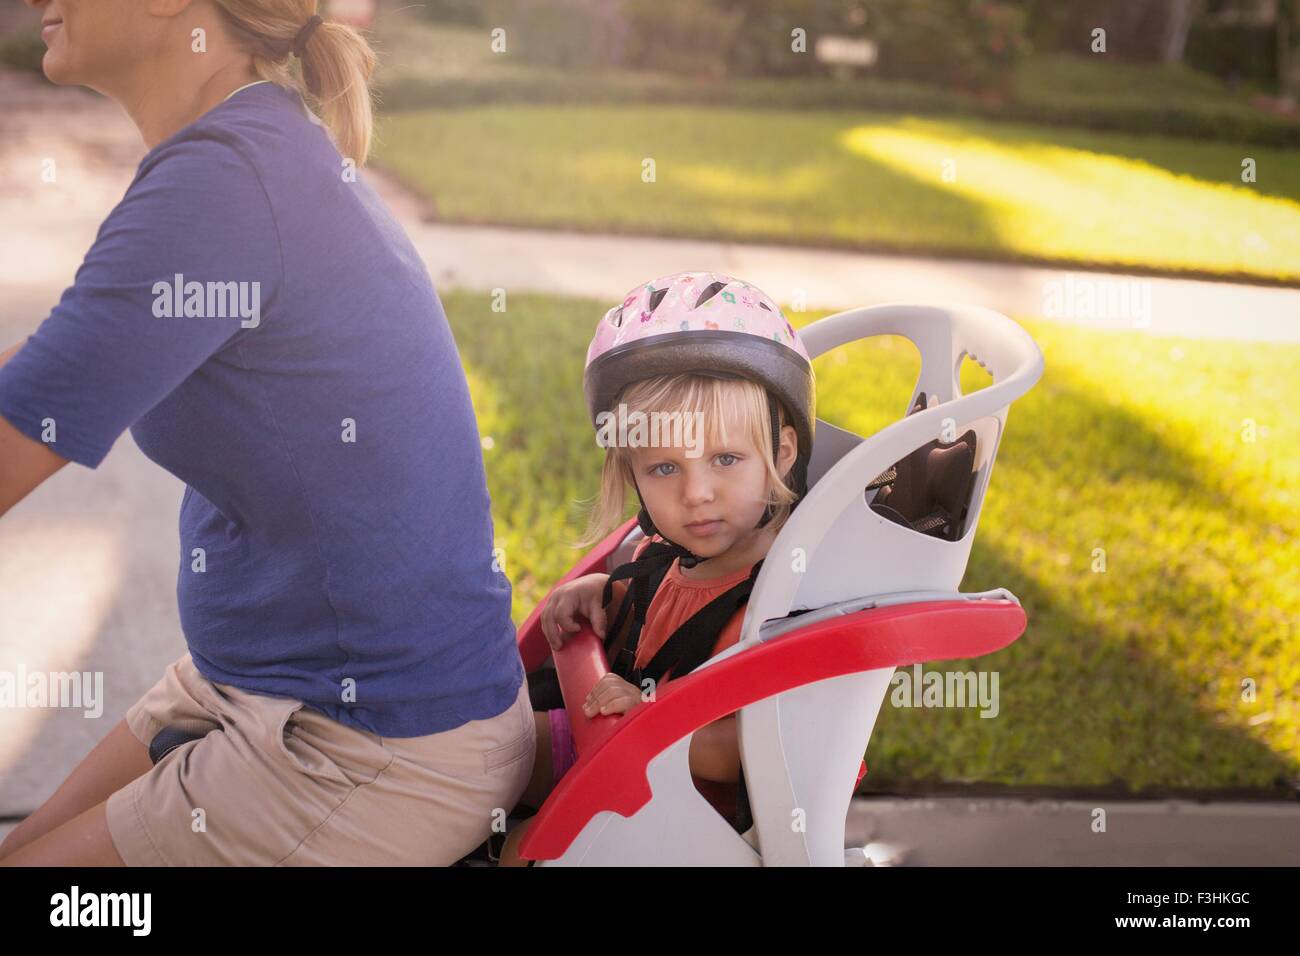 Mature woman on bicycle with daughter sitting in child's seat behind her Stock Photo